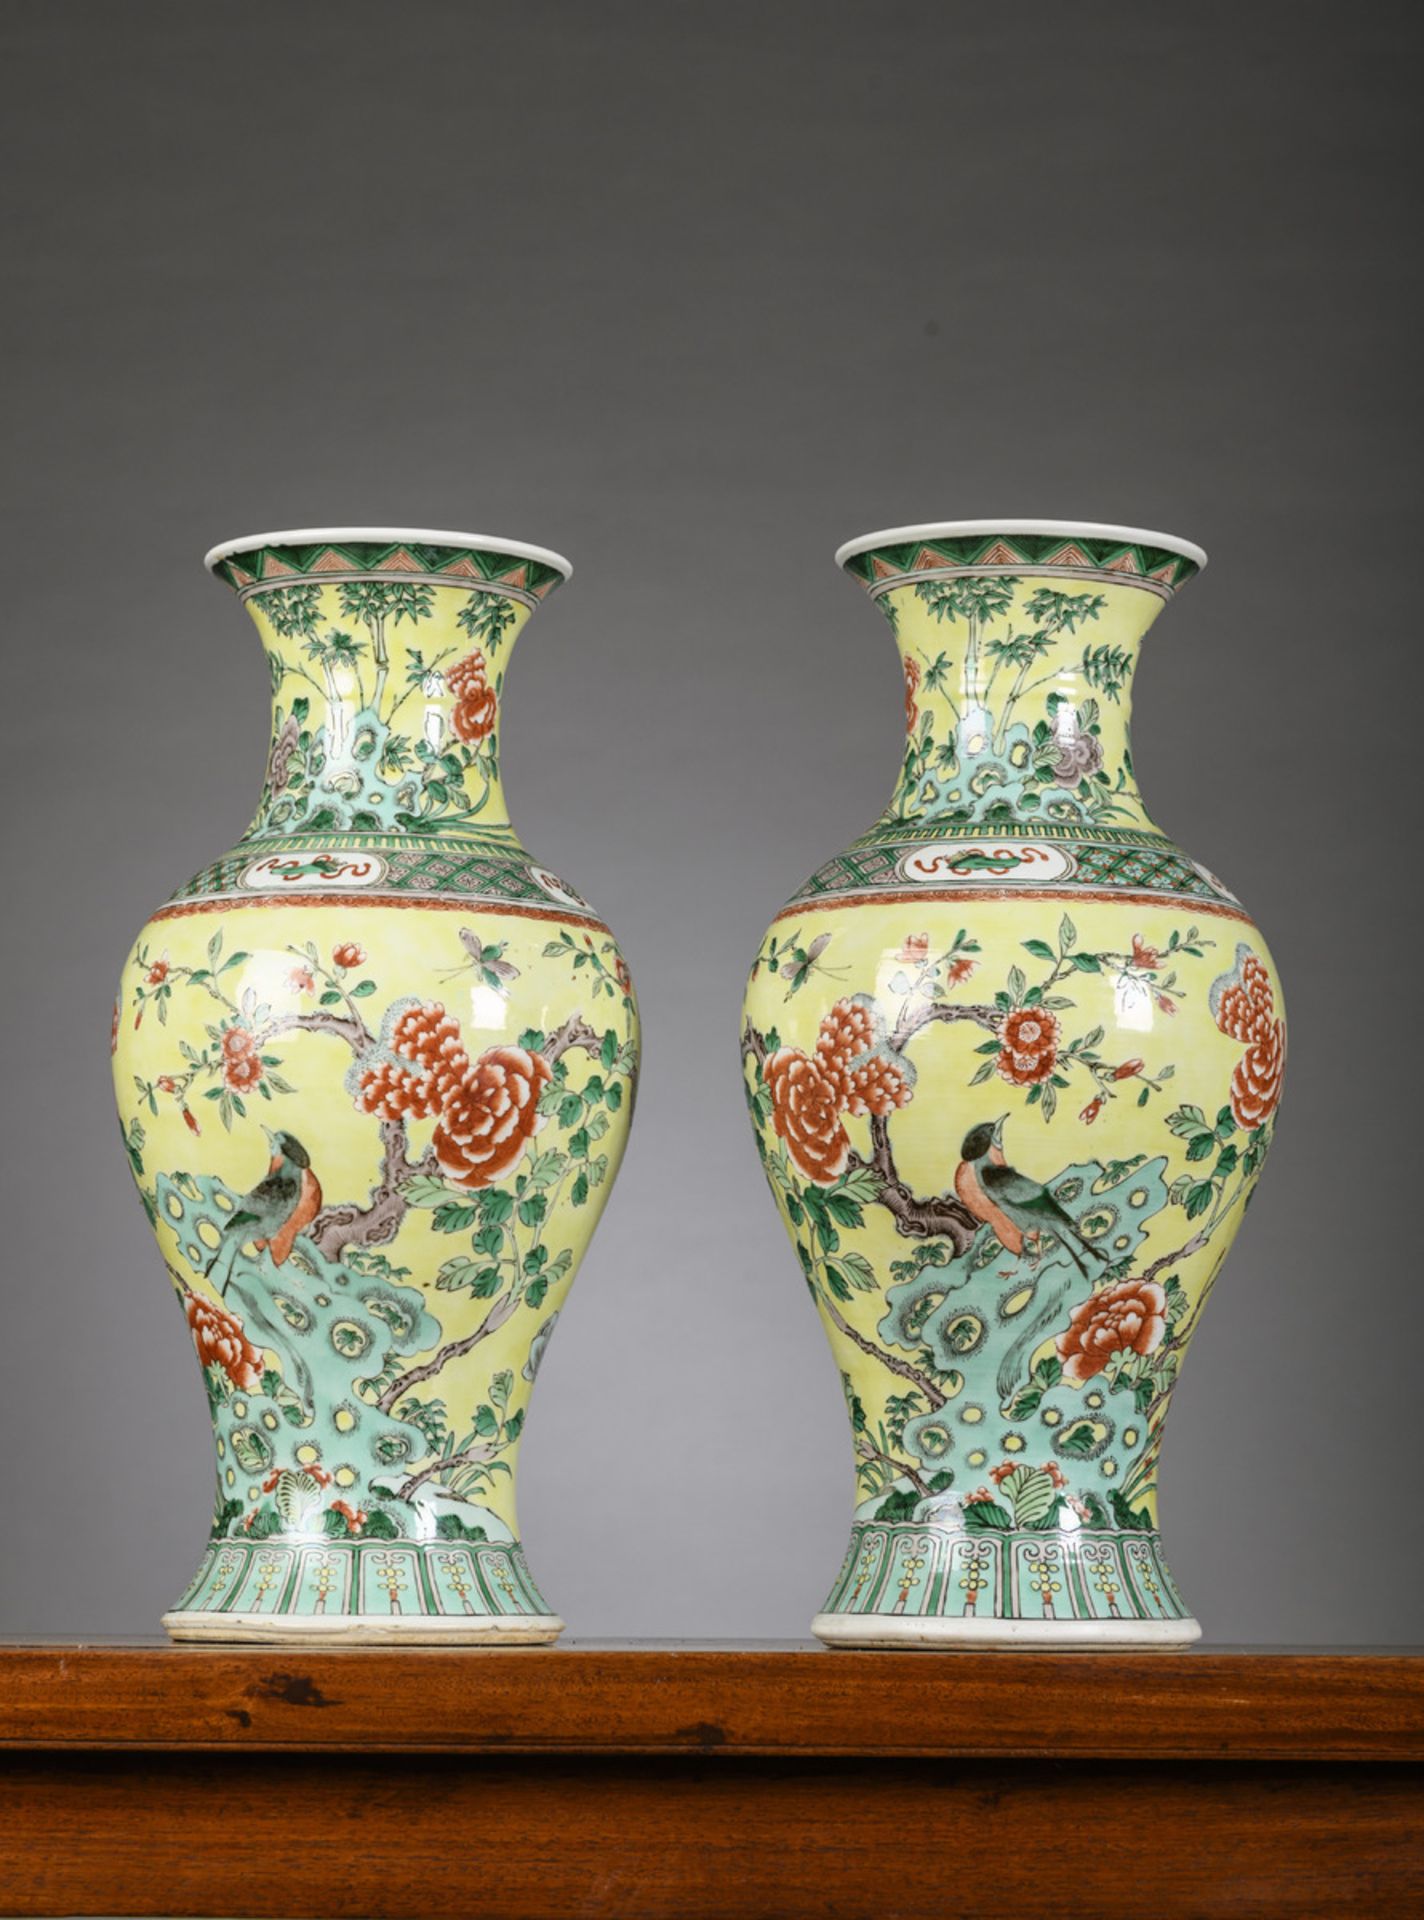 A pair of Chinese famille verte porcelain vases with yellow ground, 19th century (44.5cm)